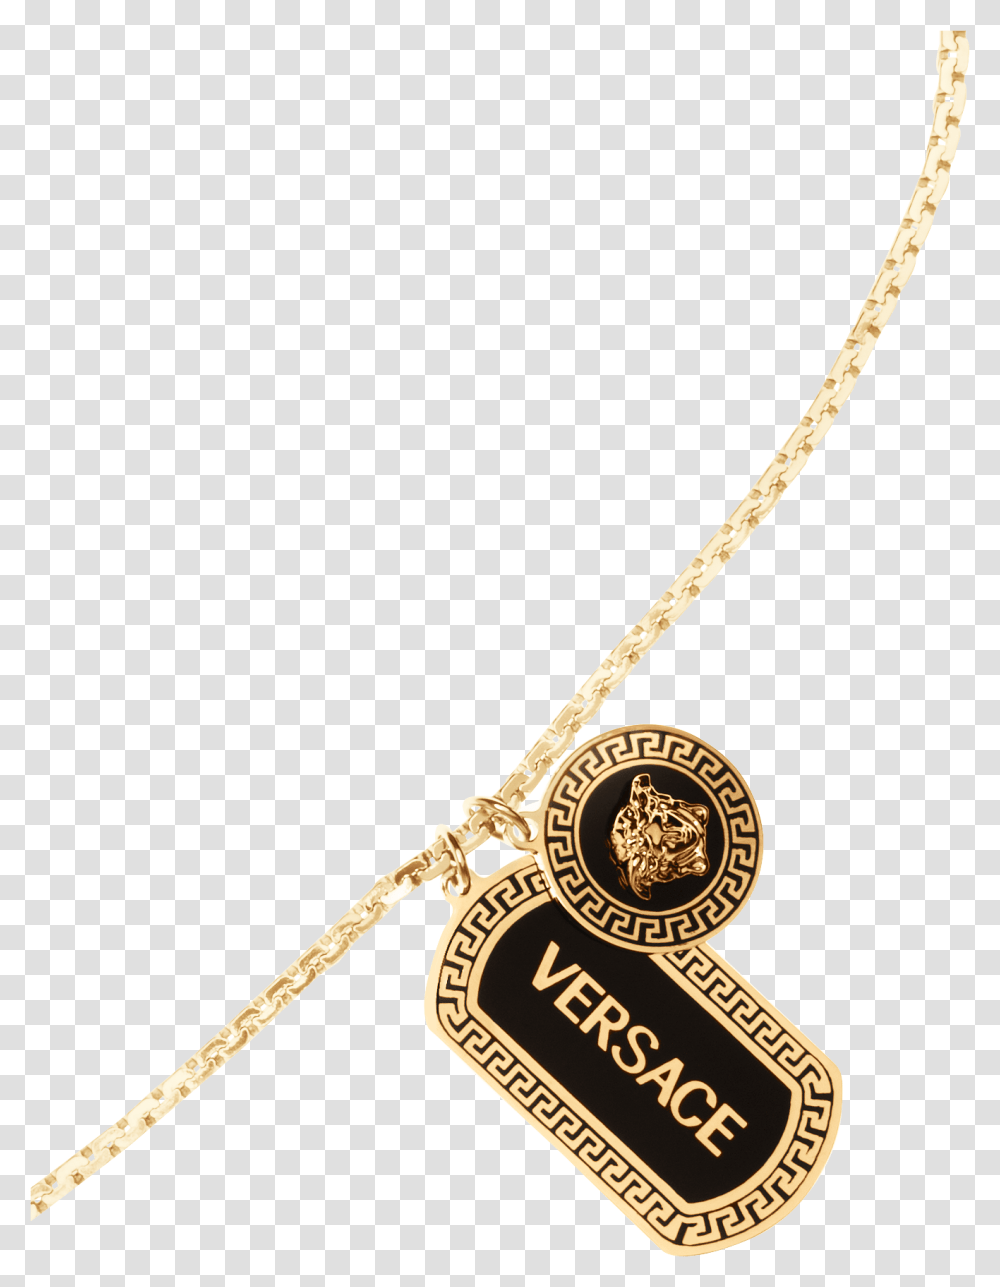 Vintage Gold Chains Necklace, Pendant, Accessories, Accessory, Jewelry Transparent Png